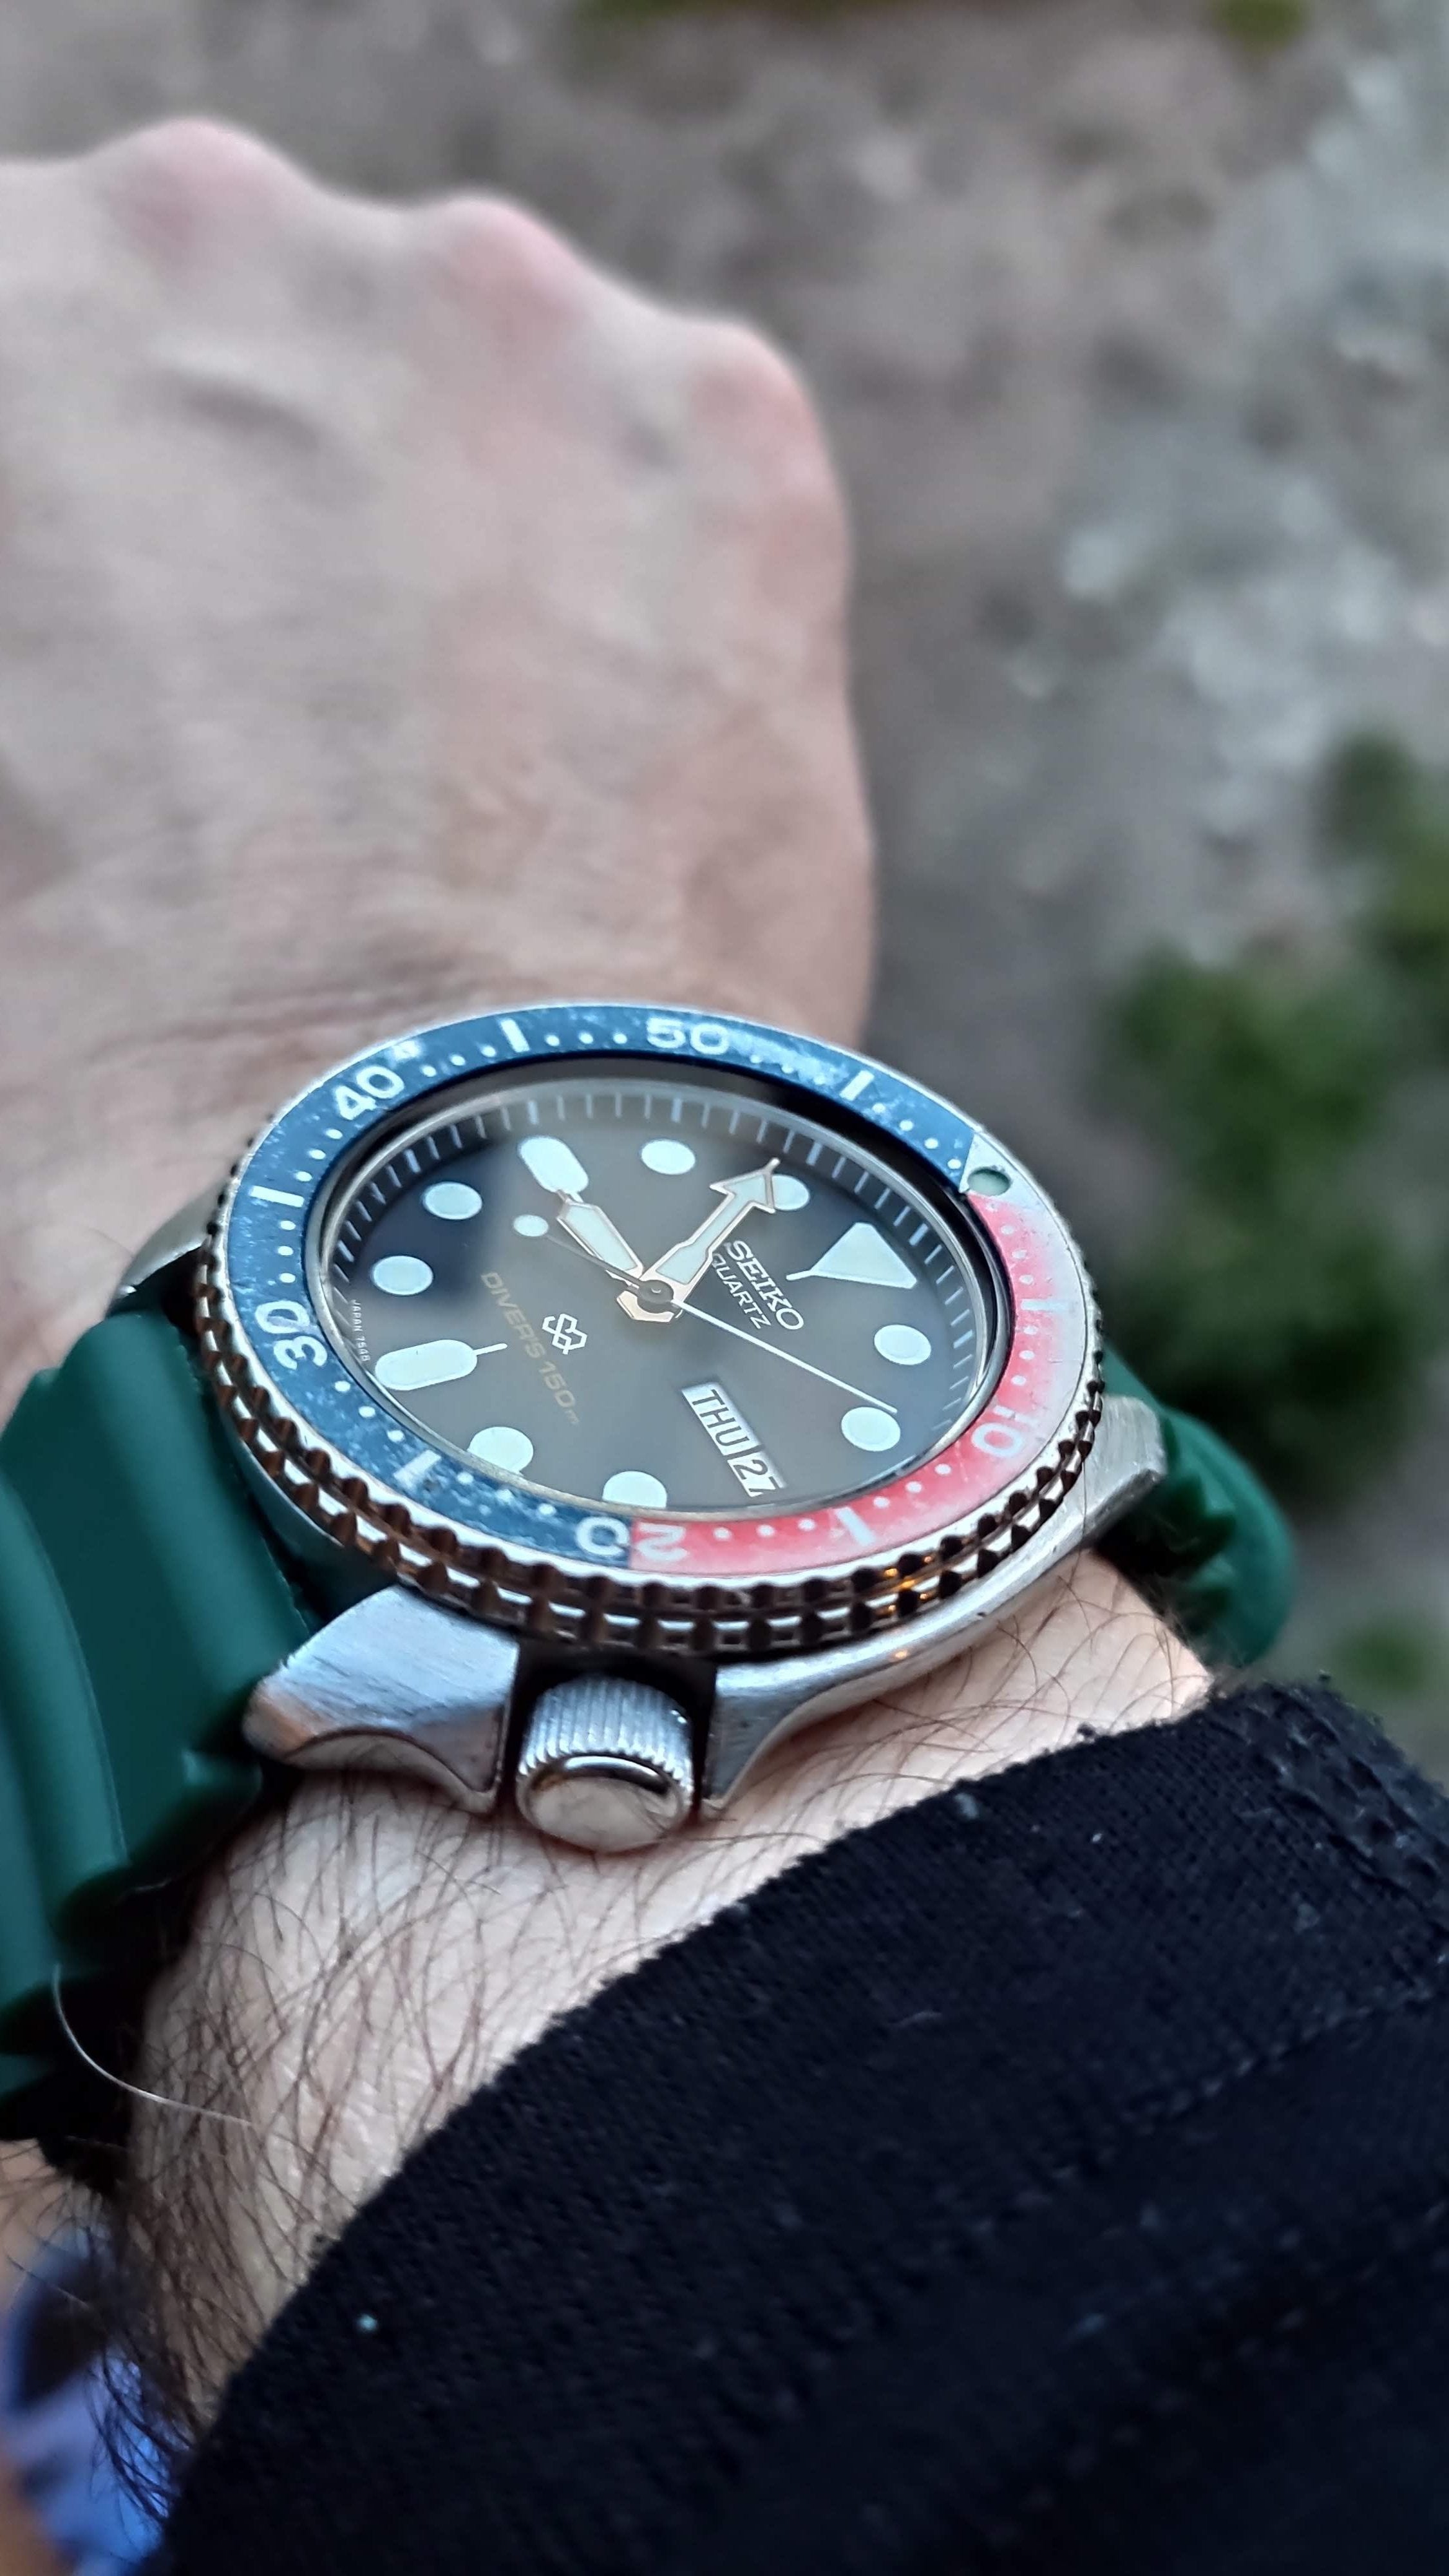 Show Us Your 7548-7000! | Page 6 | WatchUSeek Watch Forums